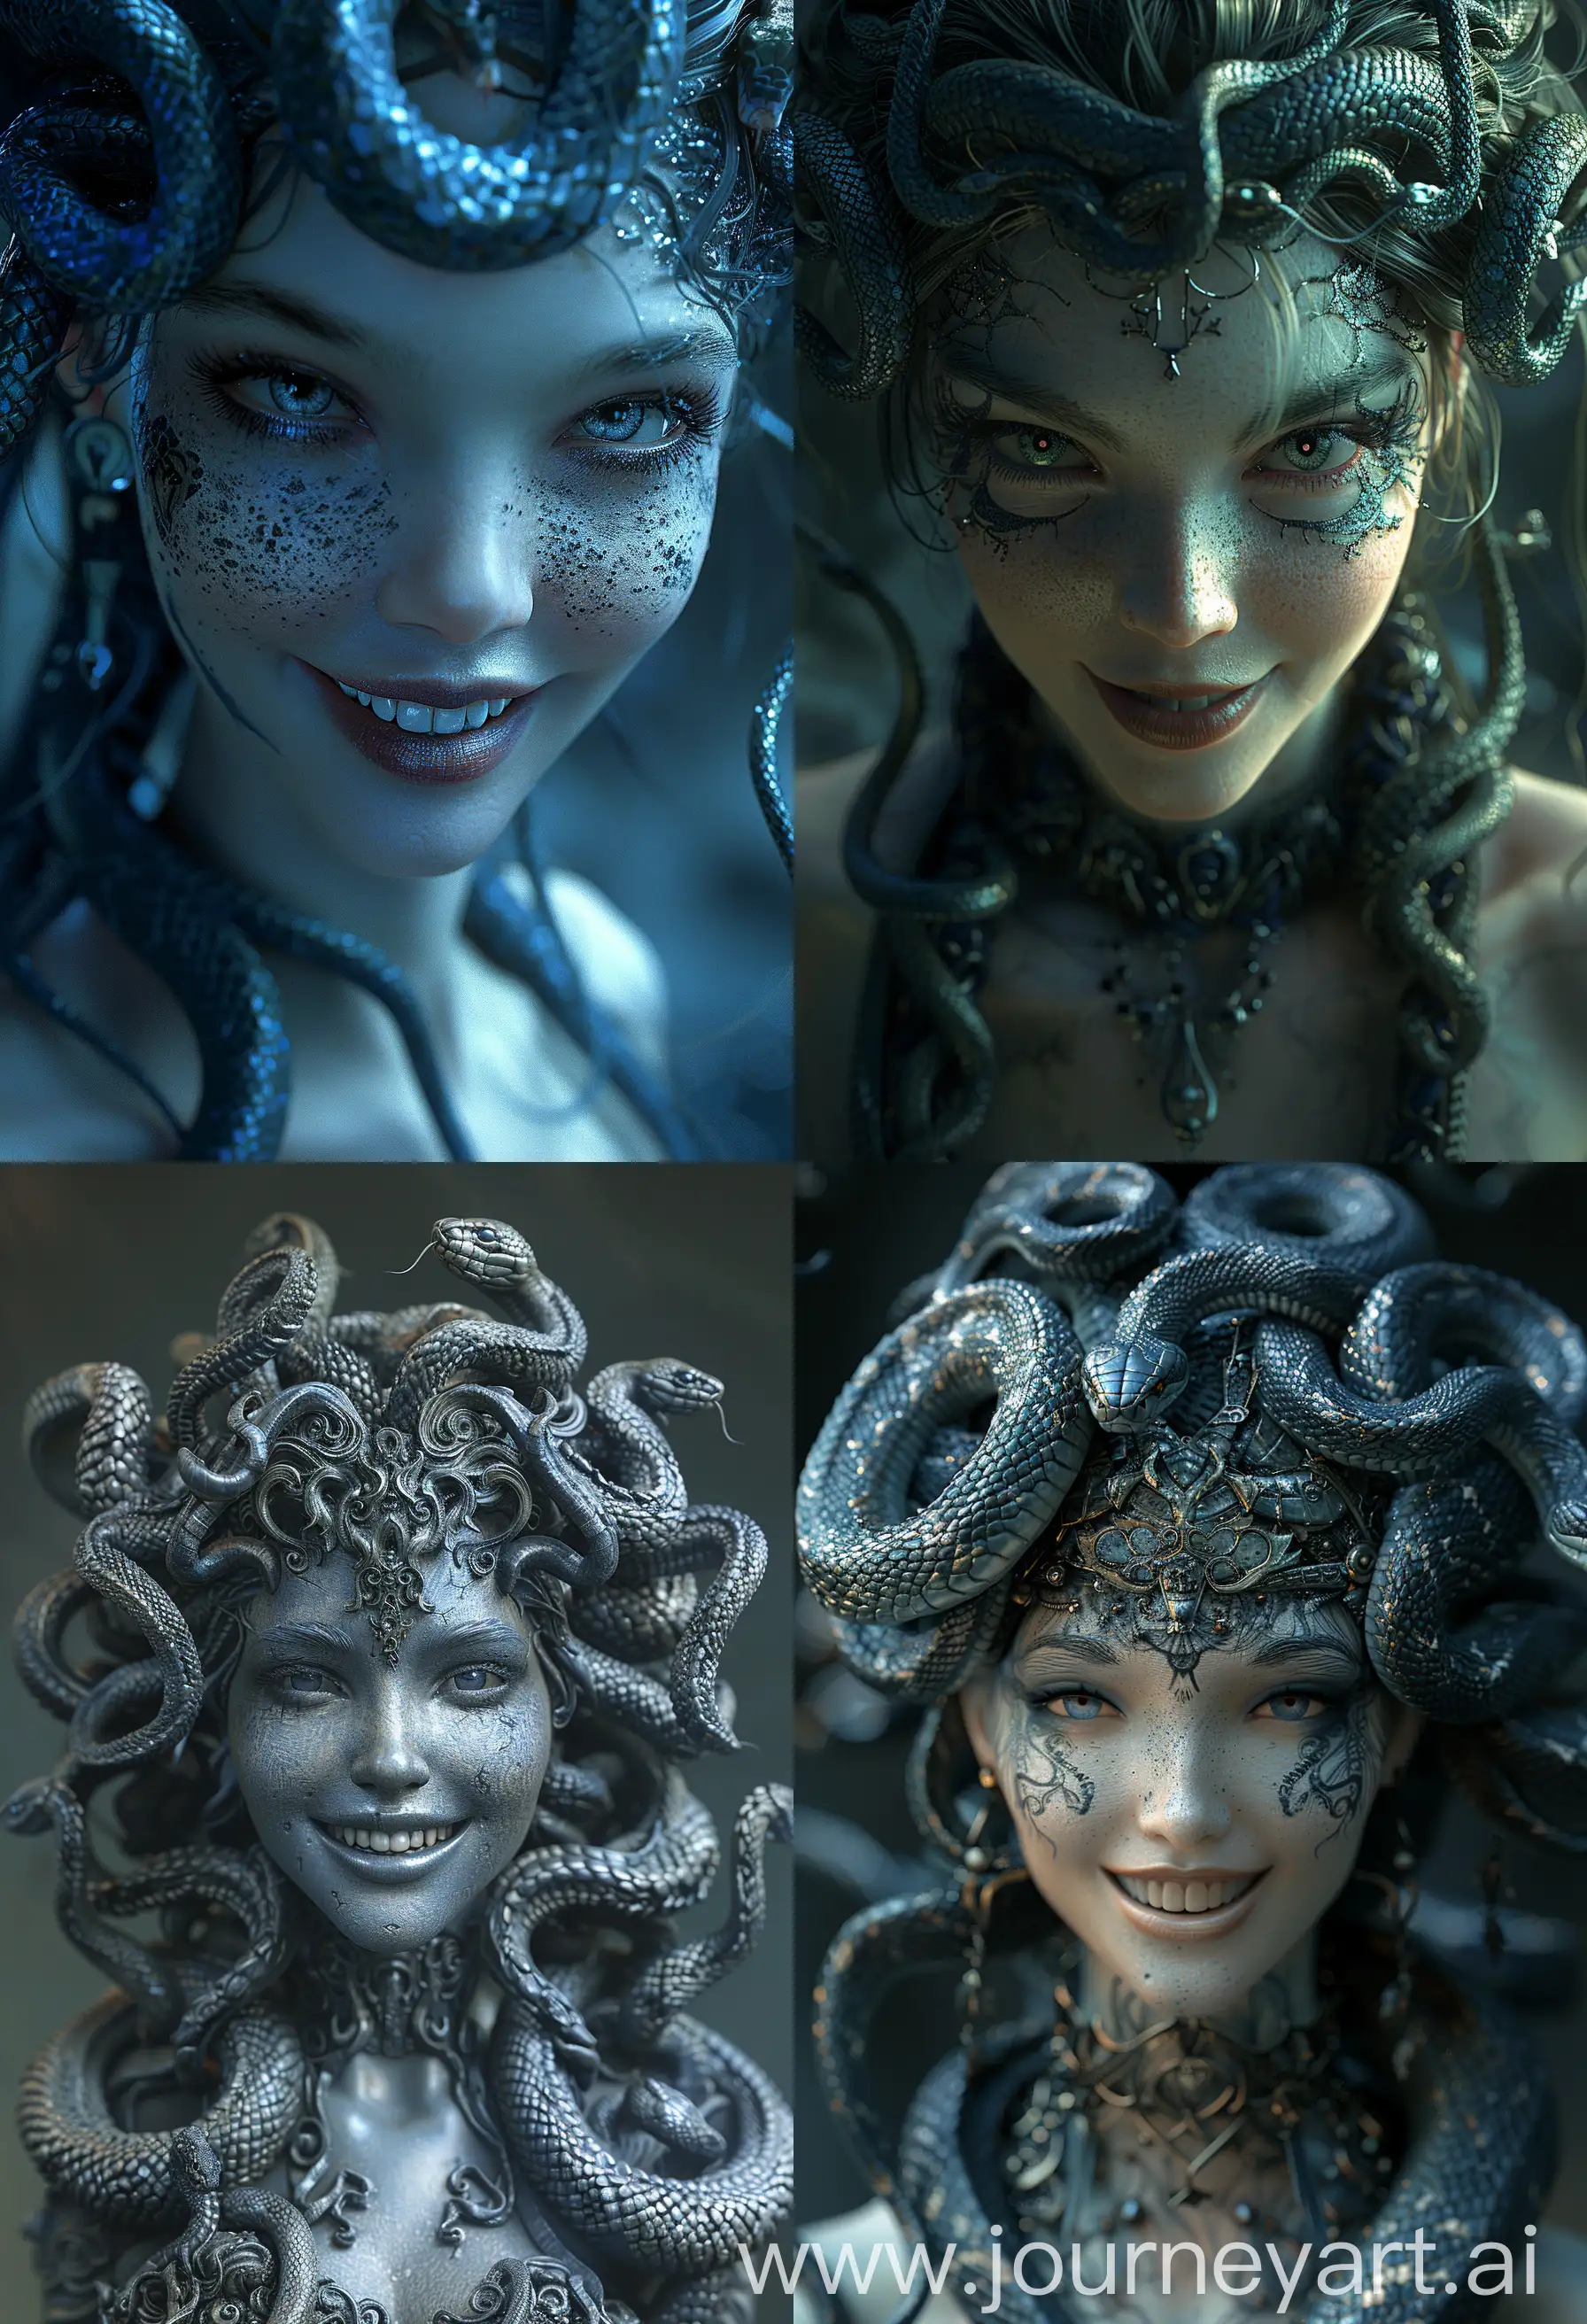 Breathtaking-Fantasycore-Masterpiece-Beautiful-Medusa-with-Intricate-SnakesforHair-and-Epic-Gameplay-Background